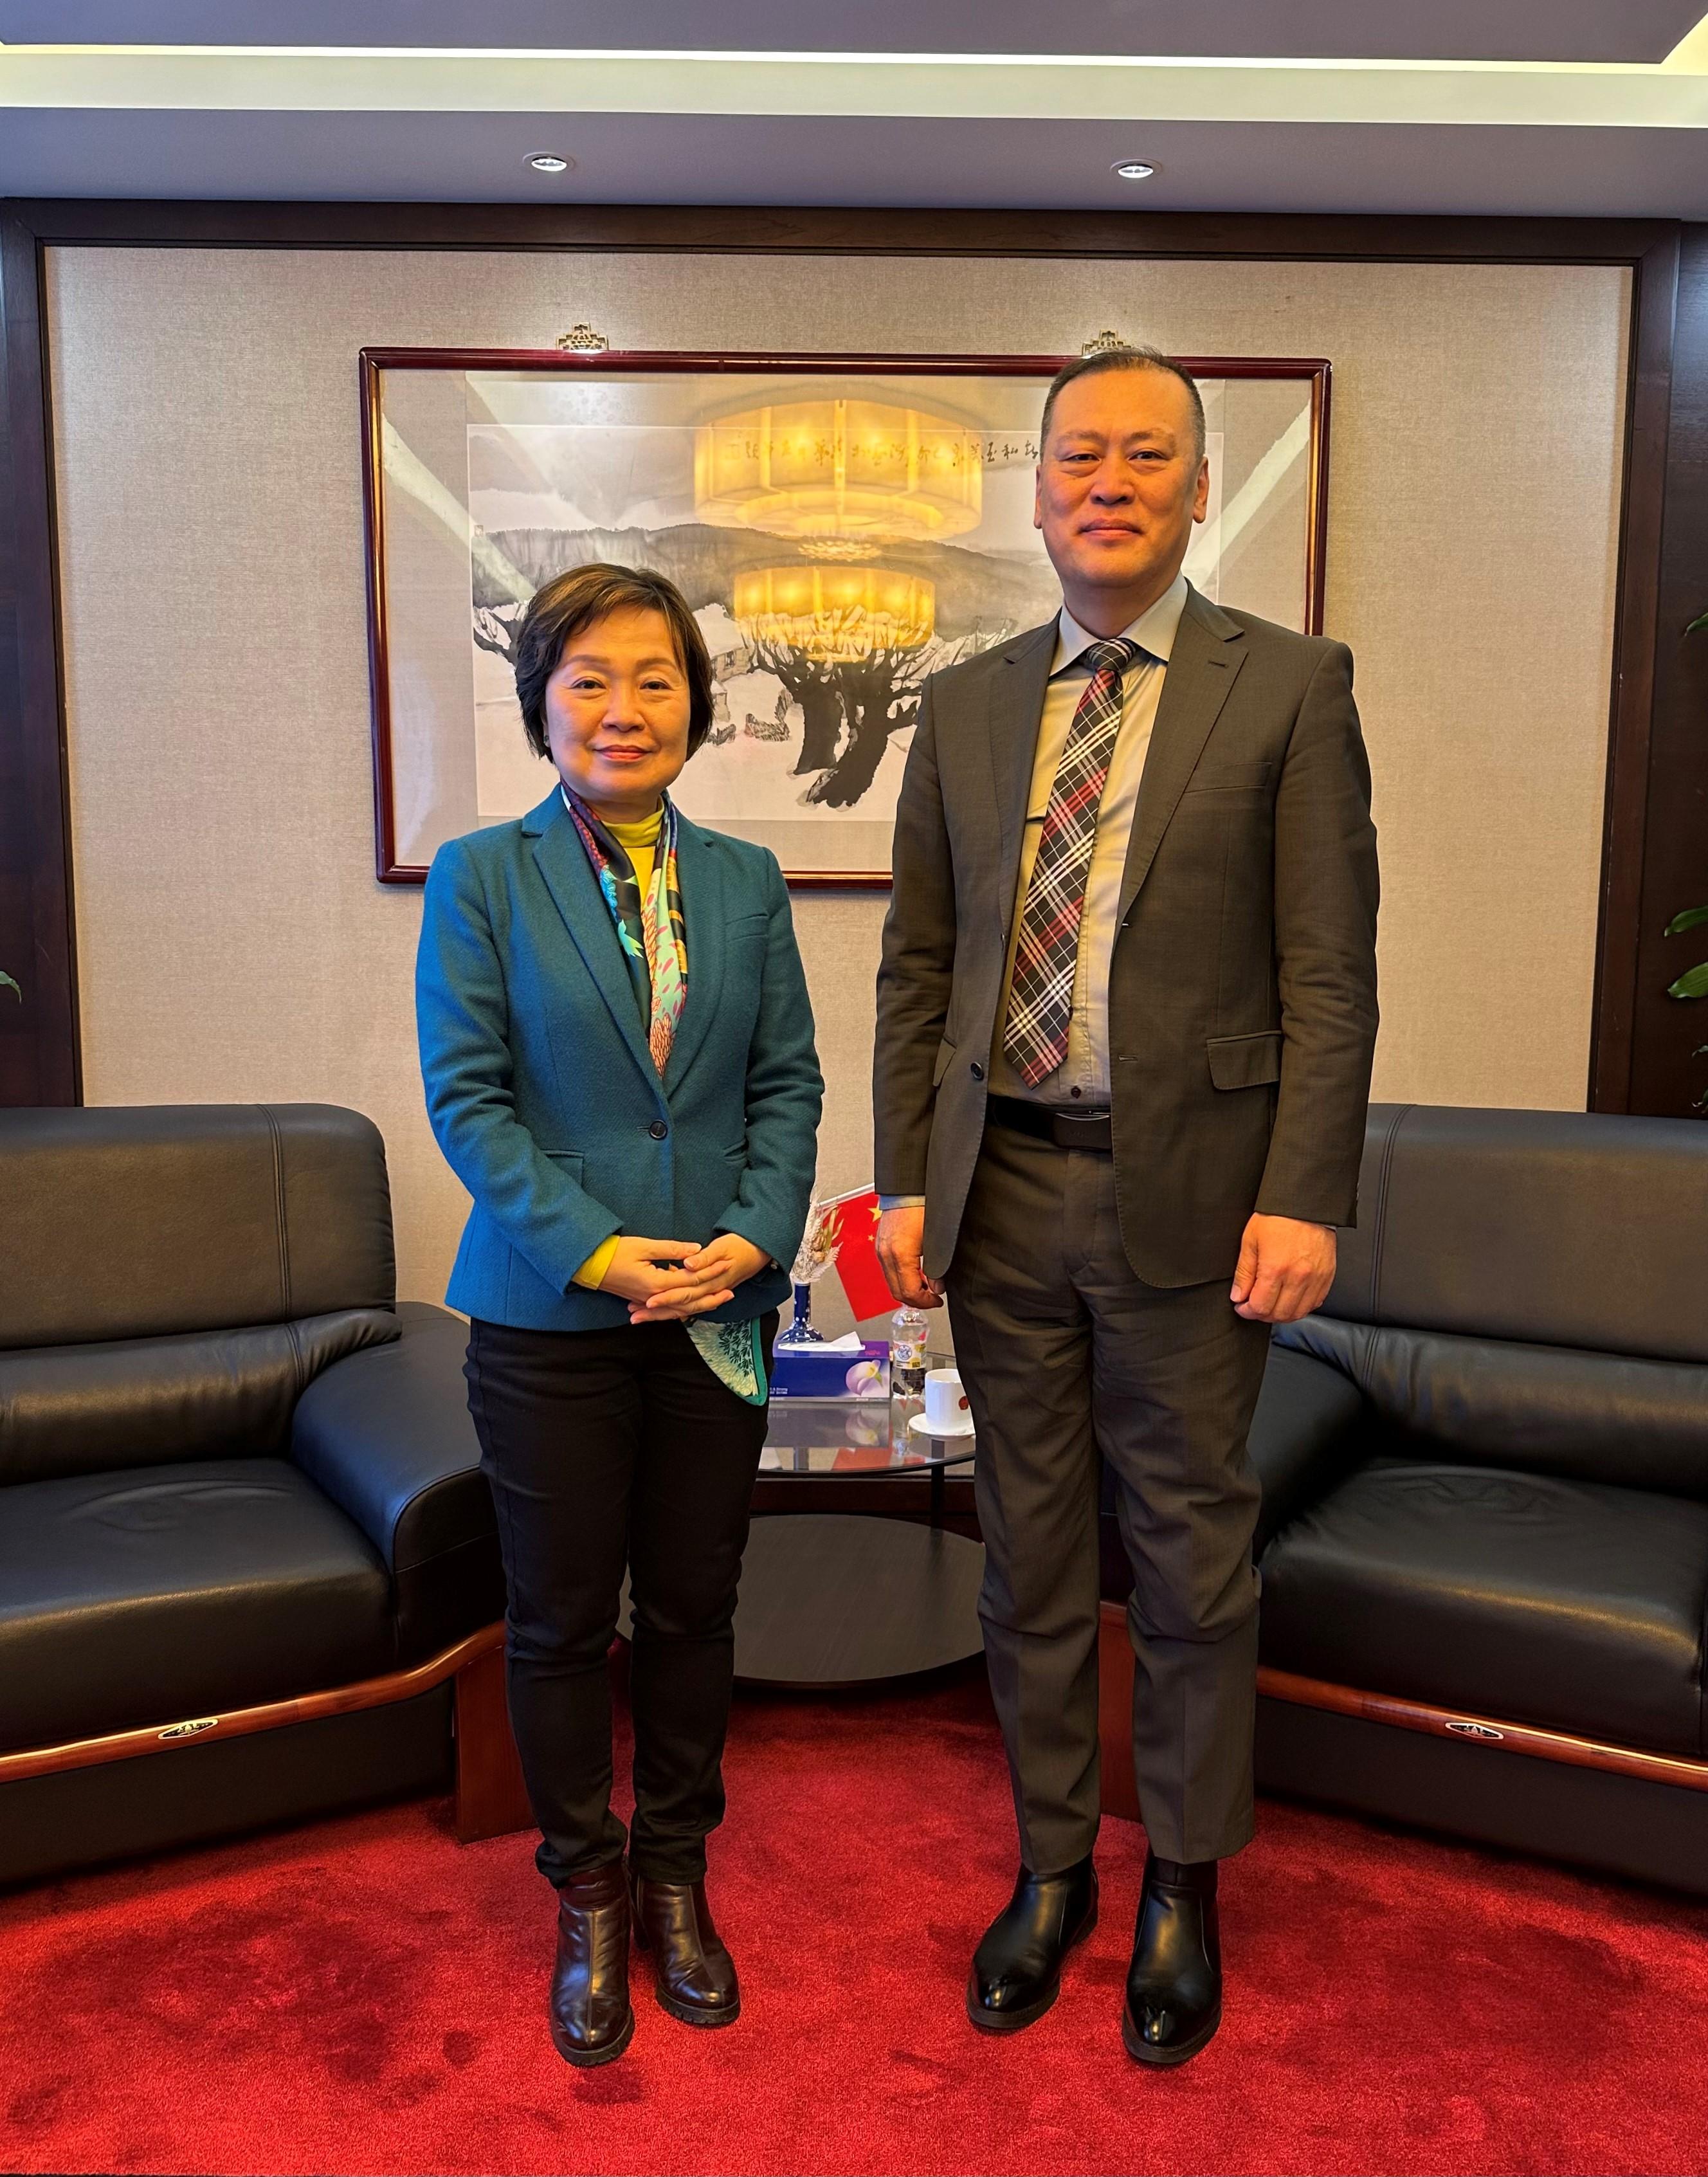 The Secretary for Education, Dr Choi Yuk-lin (left), paid a courtesy call on the Chinese Ambassador to Finland, Mr Wang Tongqing (right), in Helsinki, Finland, on January 27 (Helsinki time).